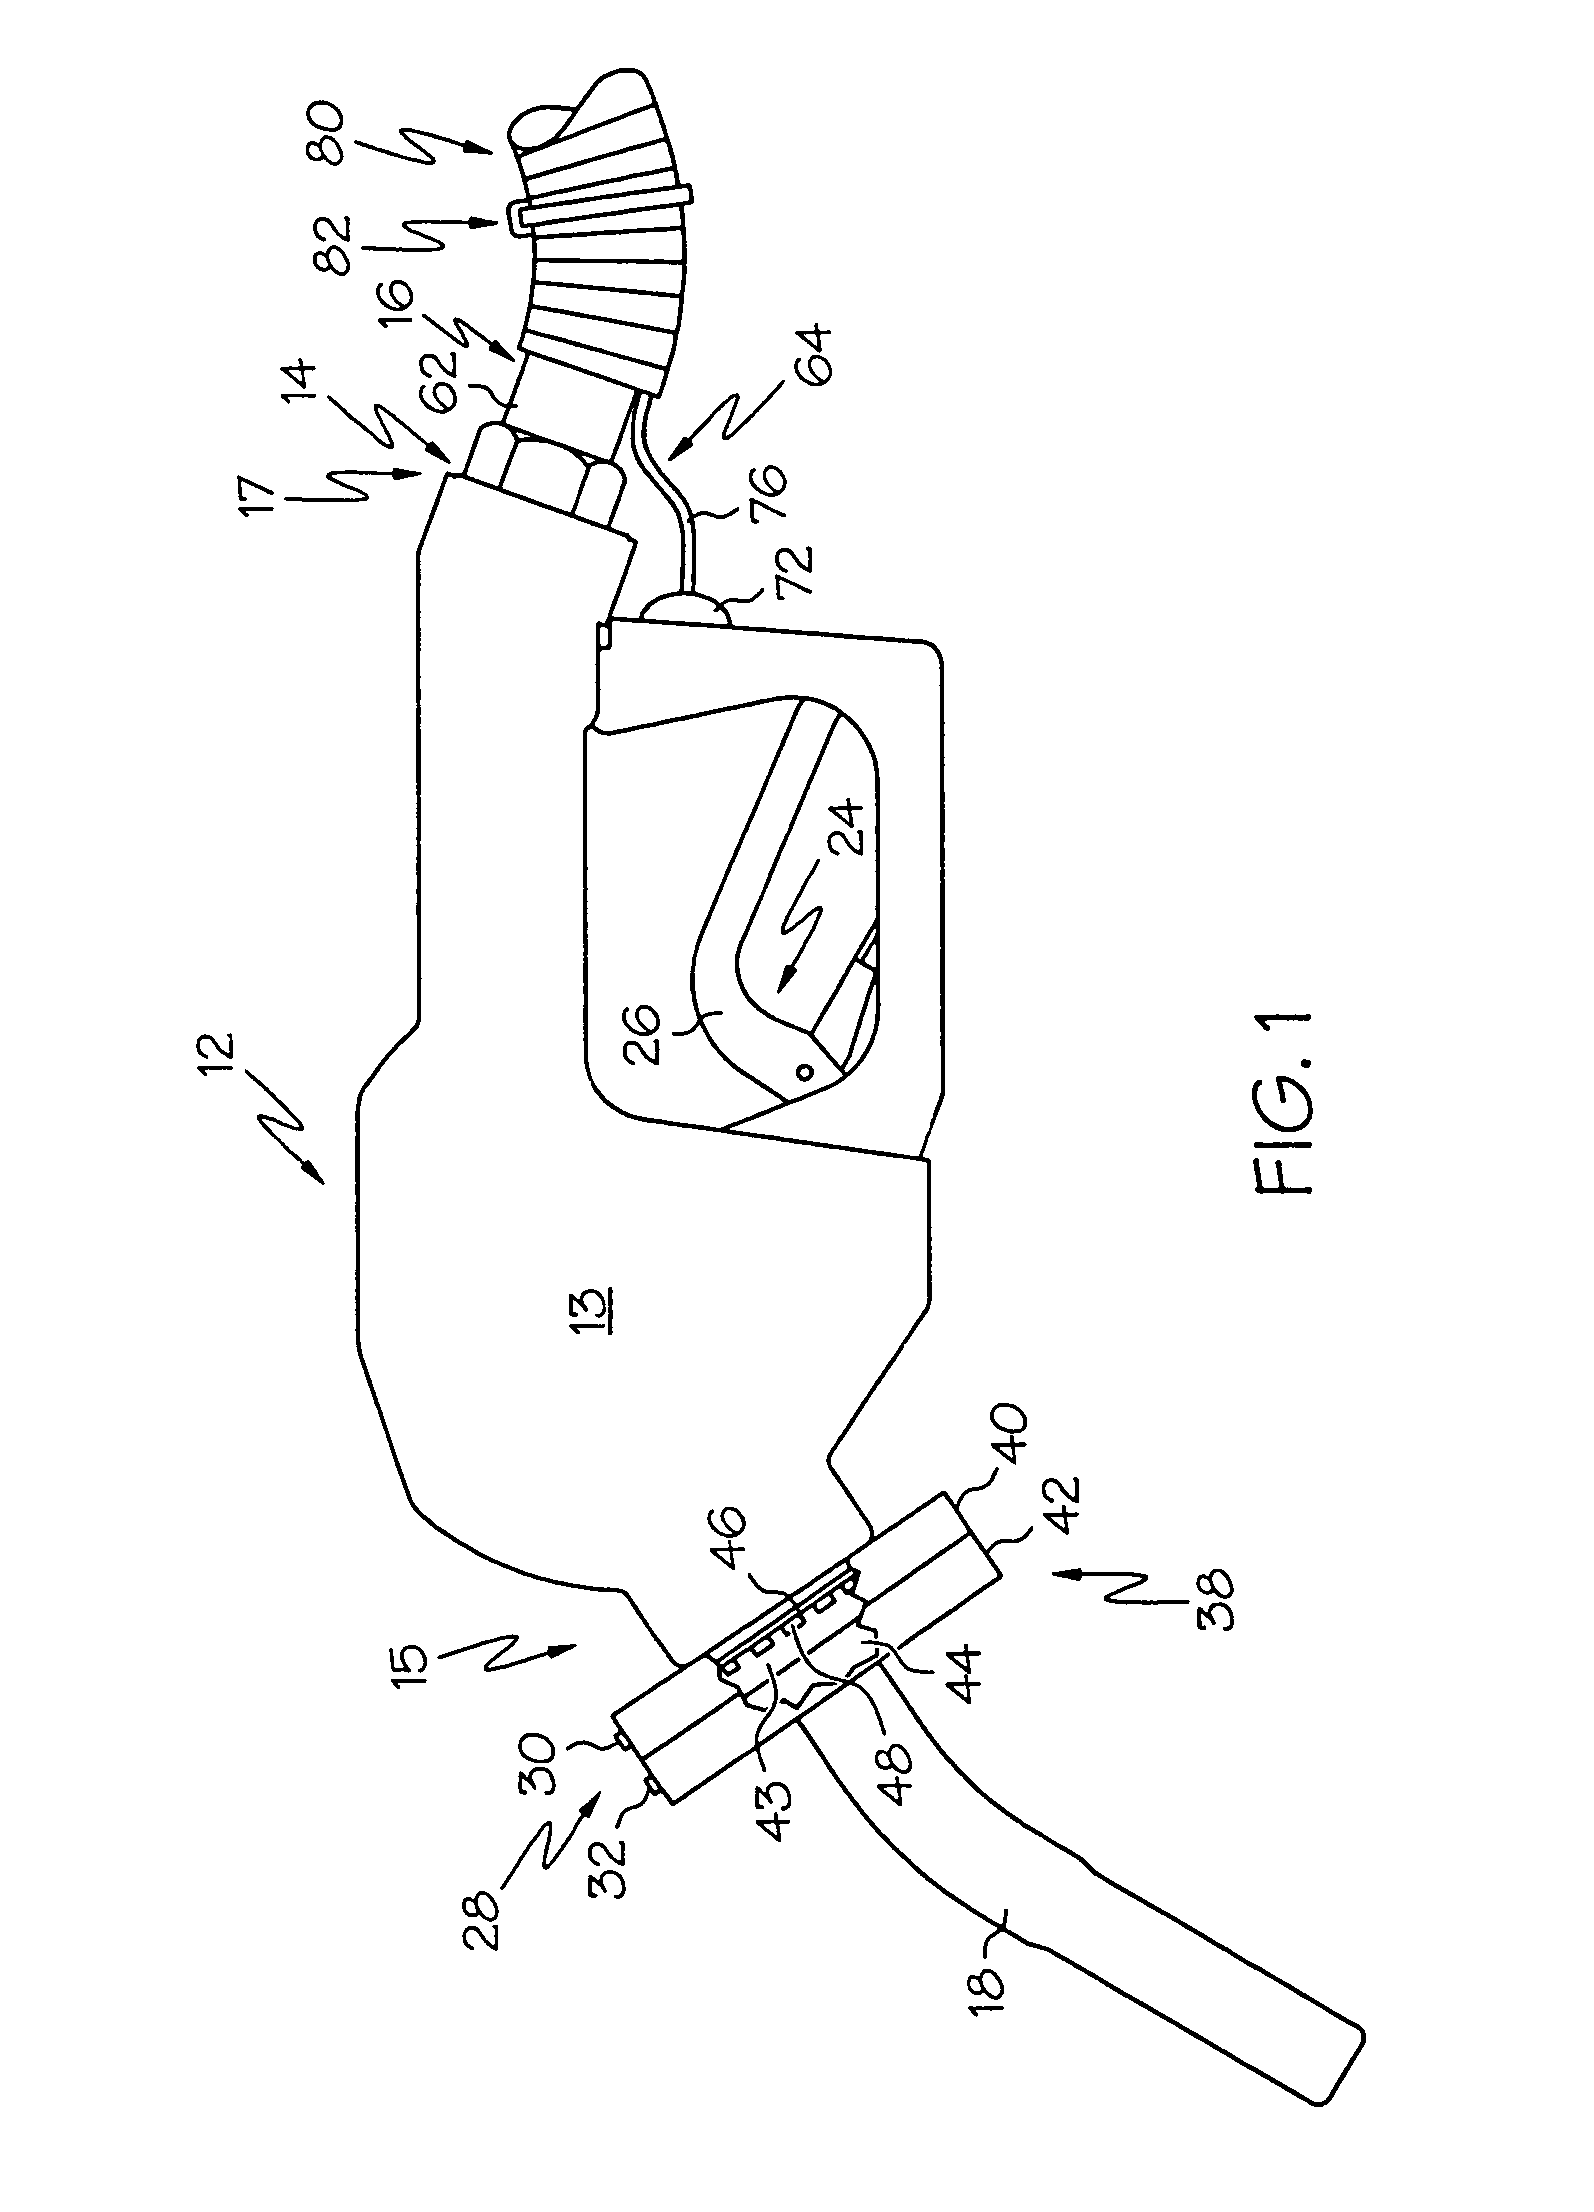 Lighted supervisory system for a fuel dispensing nozzle